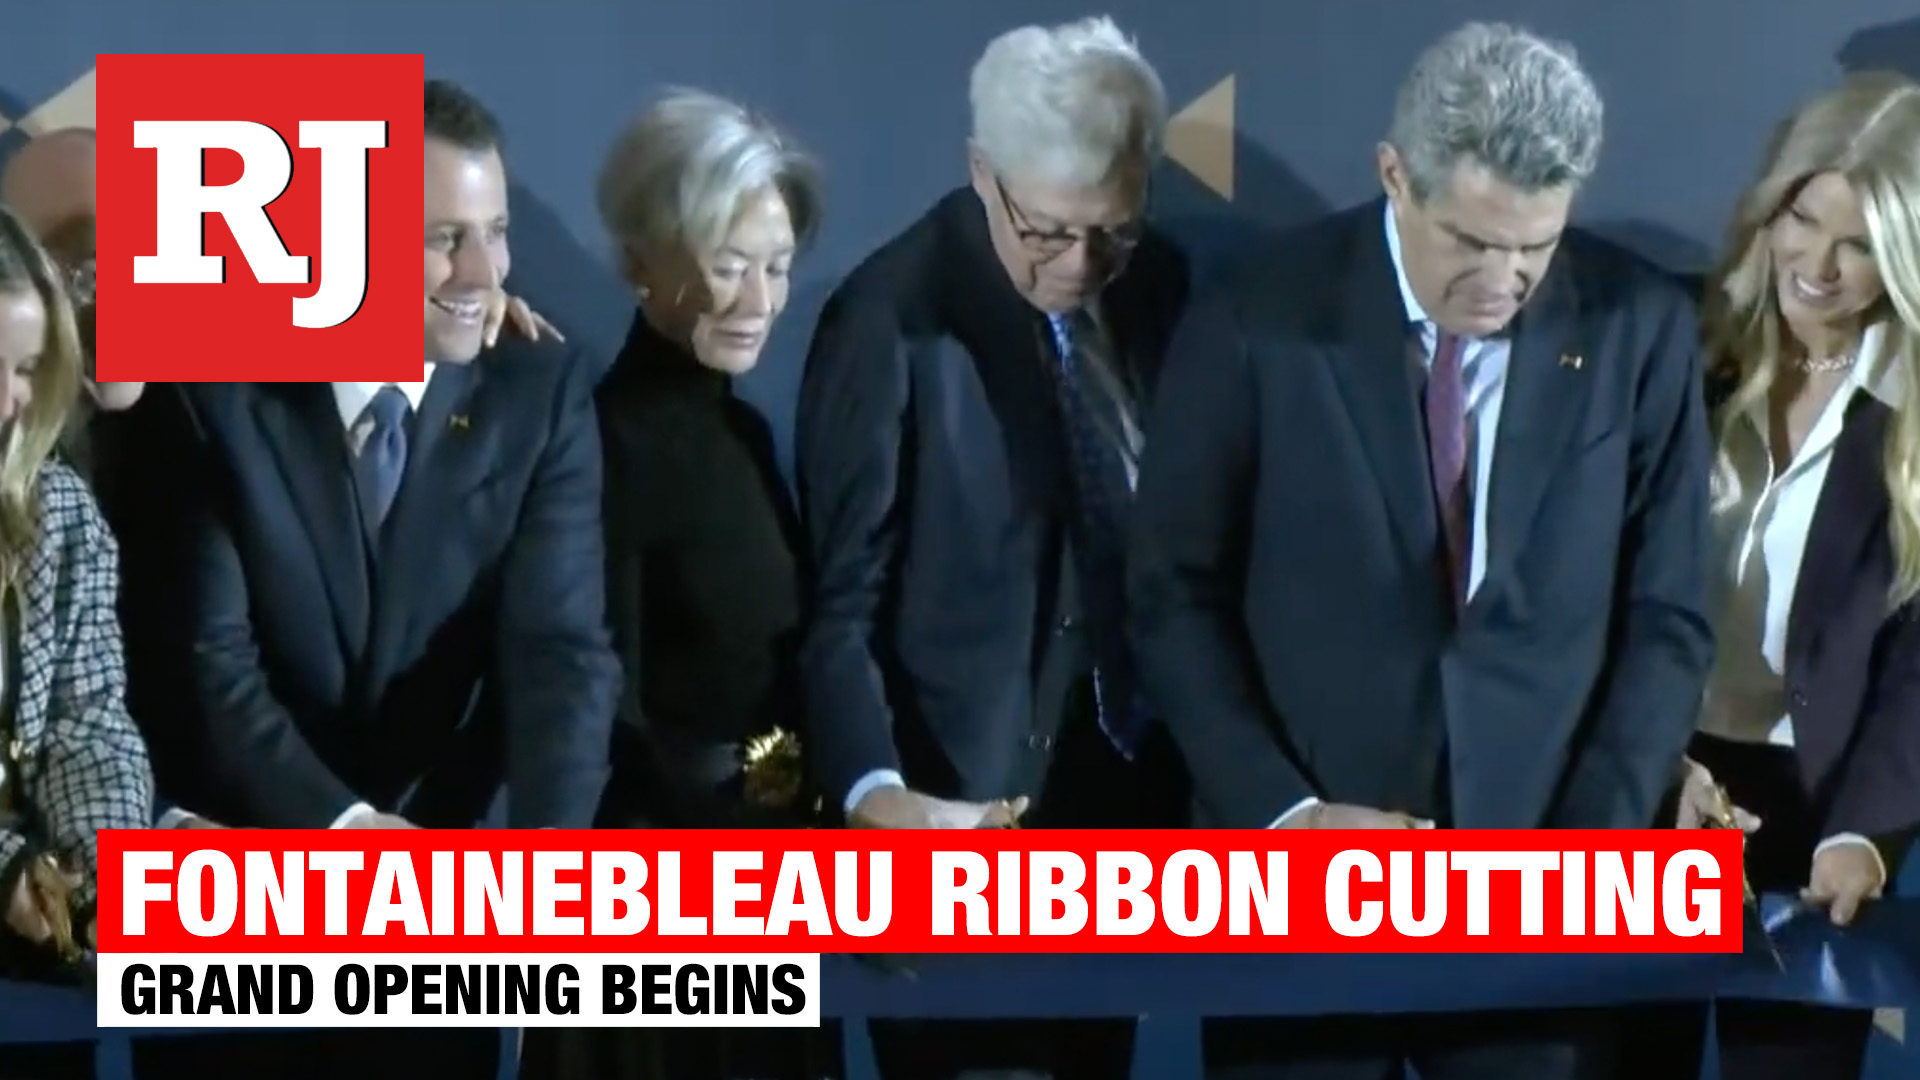 Fontainebleau ribbon cutting ceremony